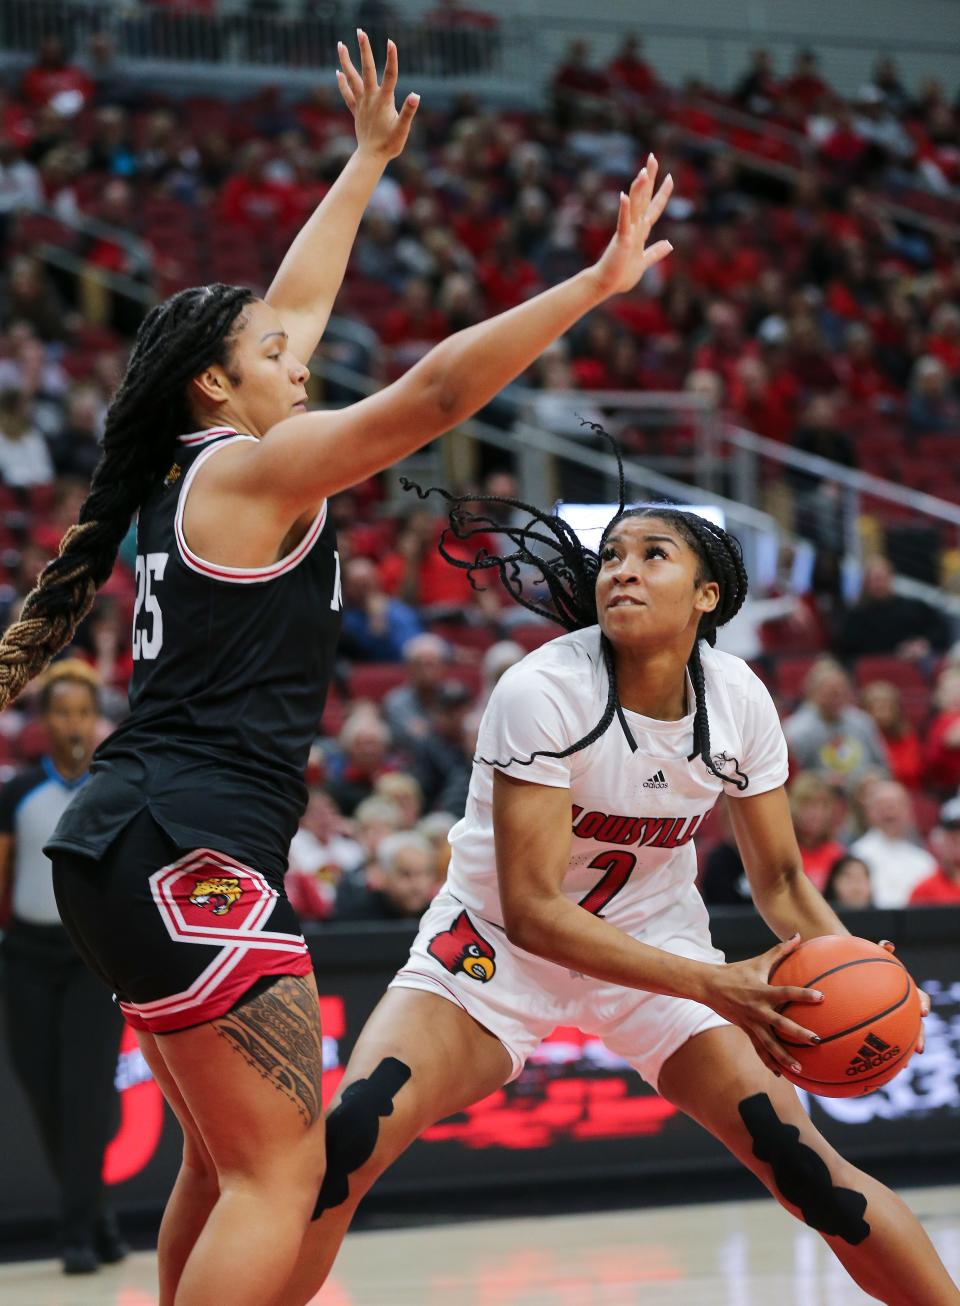 U of L's Nyla Harris (2) looked for room to operate against IUPUI's Brianna Wooldridge (25) during their game at the Yum Center in Louisville, Ky. on Nov. 10, 2022.